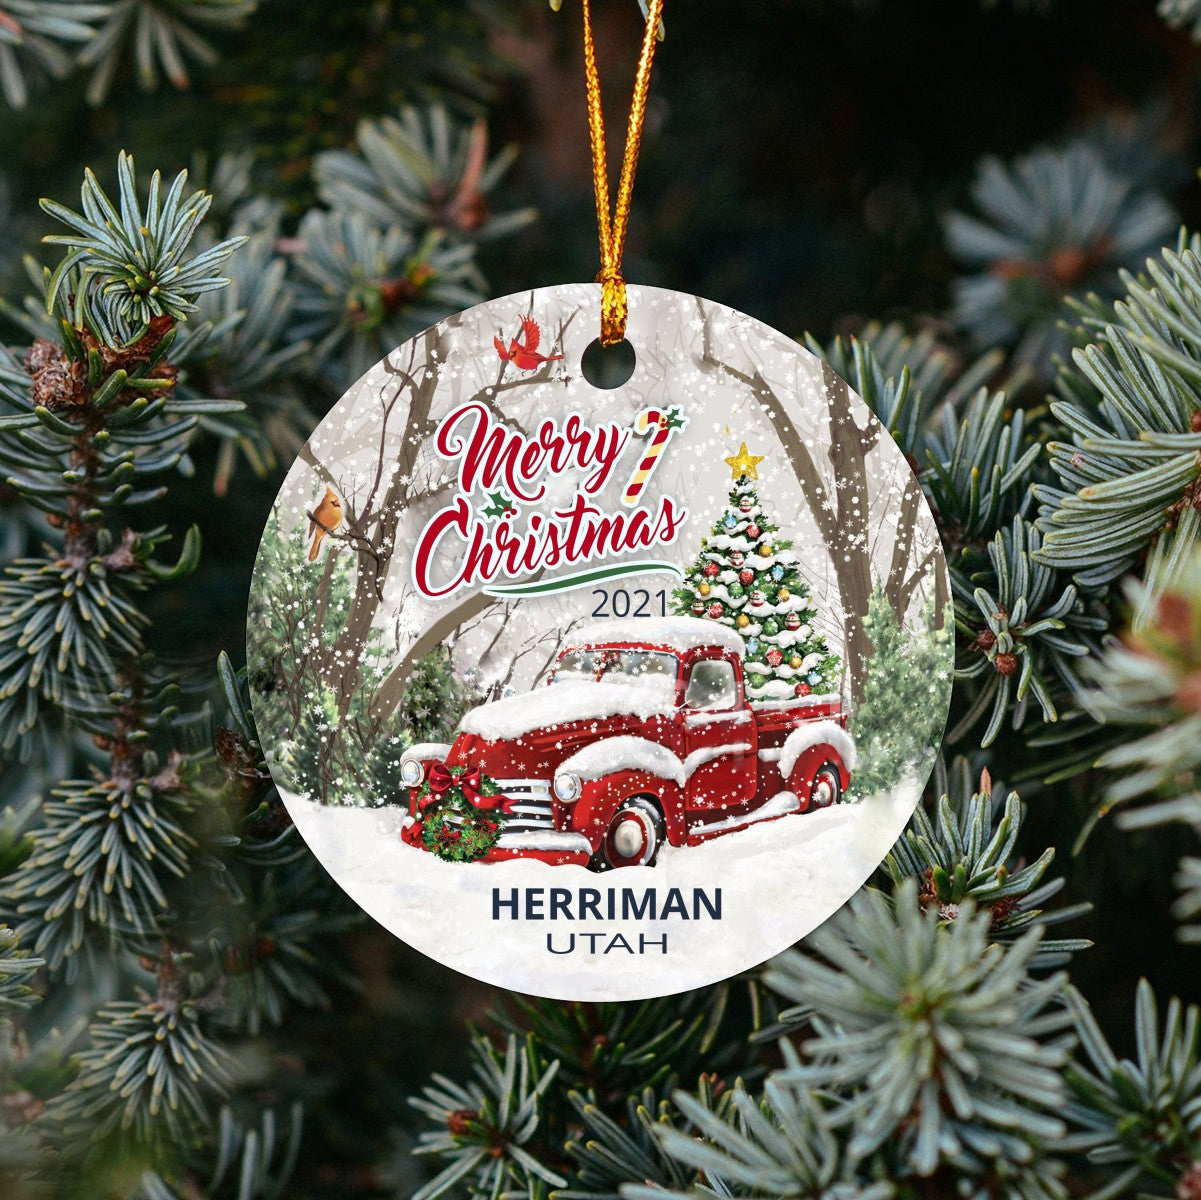 Christmas Tree Ornaments Herriman - Ornament Customize With Name City And State Herriman Utah UT - Red Truck Xmas Ornaments 3'' Plastic Gift For Family, Friend And Housewarming